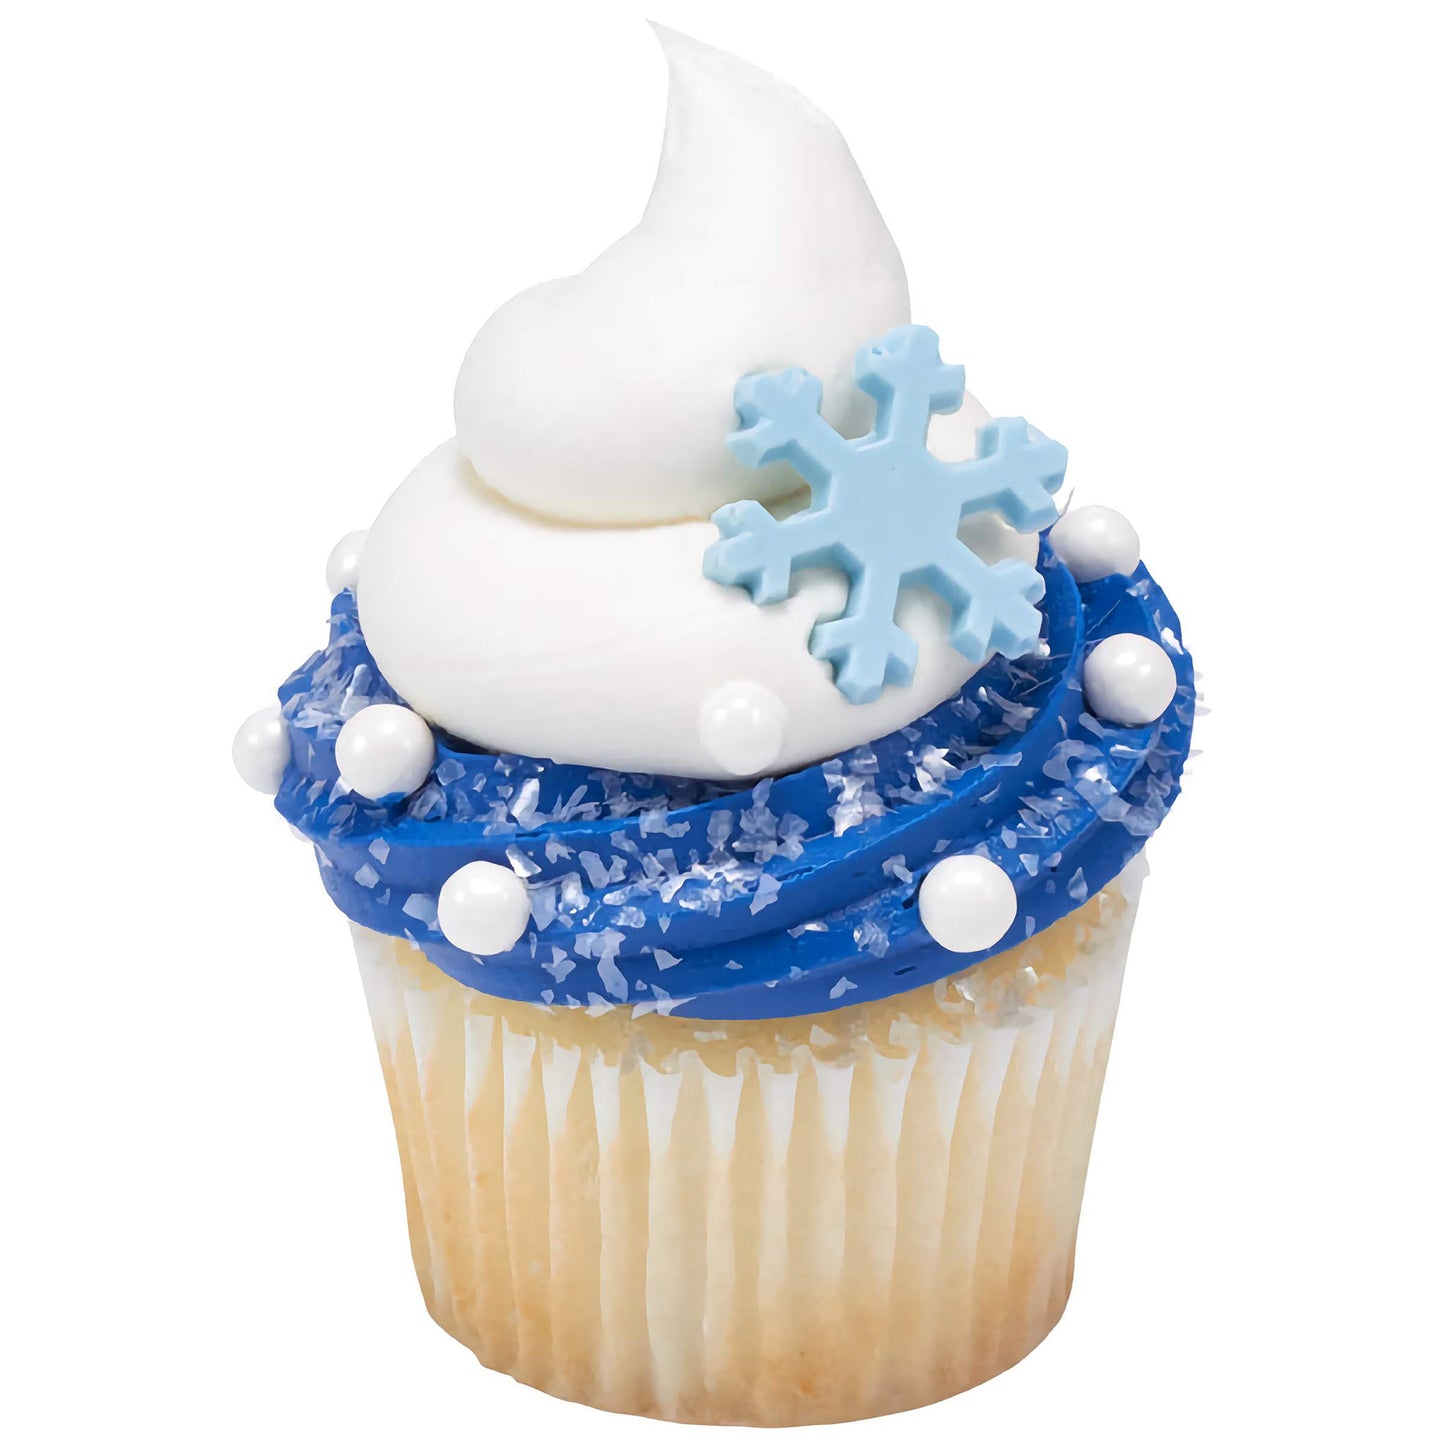 A cupcake with rich blue frosting topped with a large white sugar flower, decorated with white edible sugar pearls, adding a touch of elegance and winter theme with snowflake-shaped sprinkles.